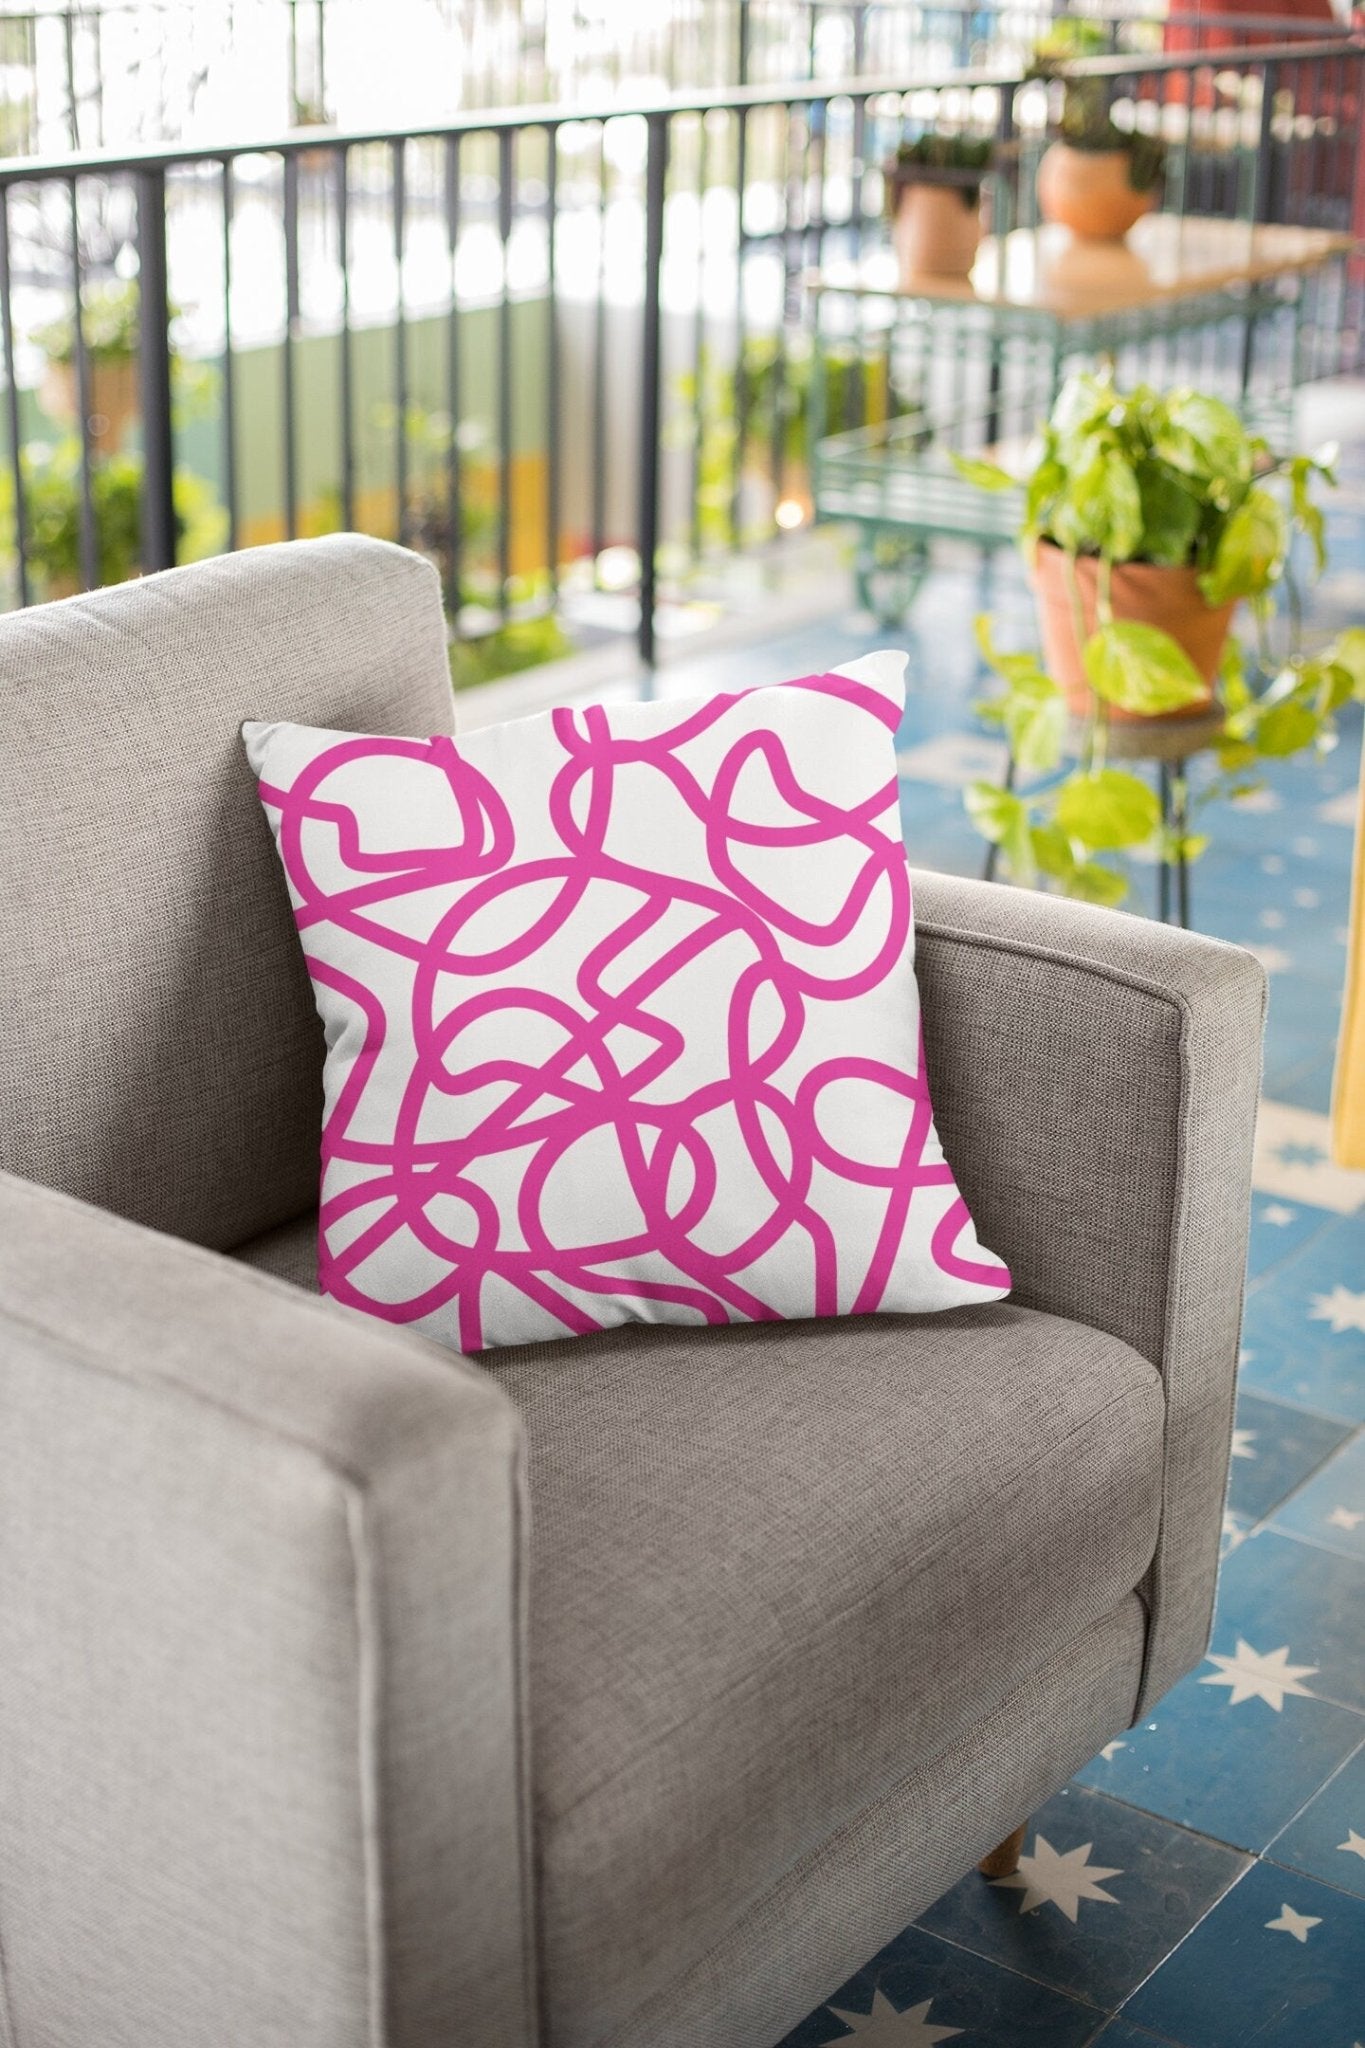 Bright Pink Pillow in Abstract Print